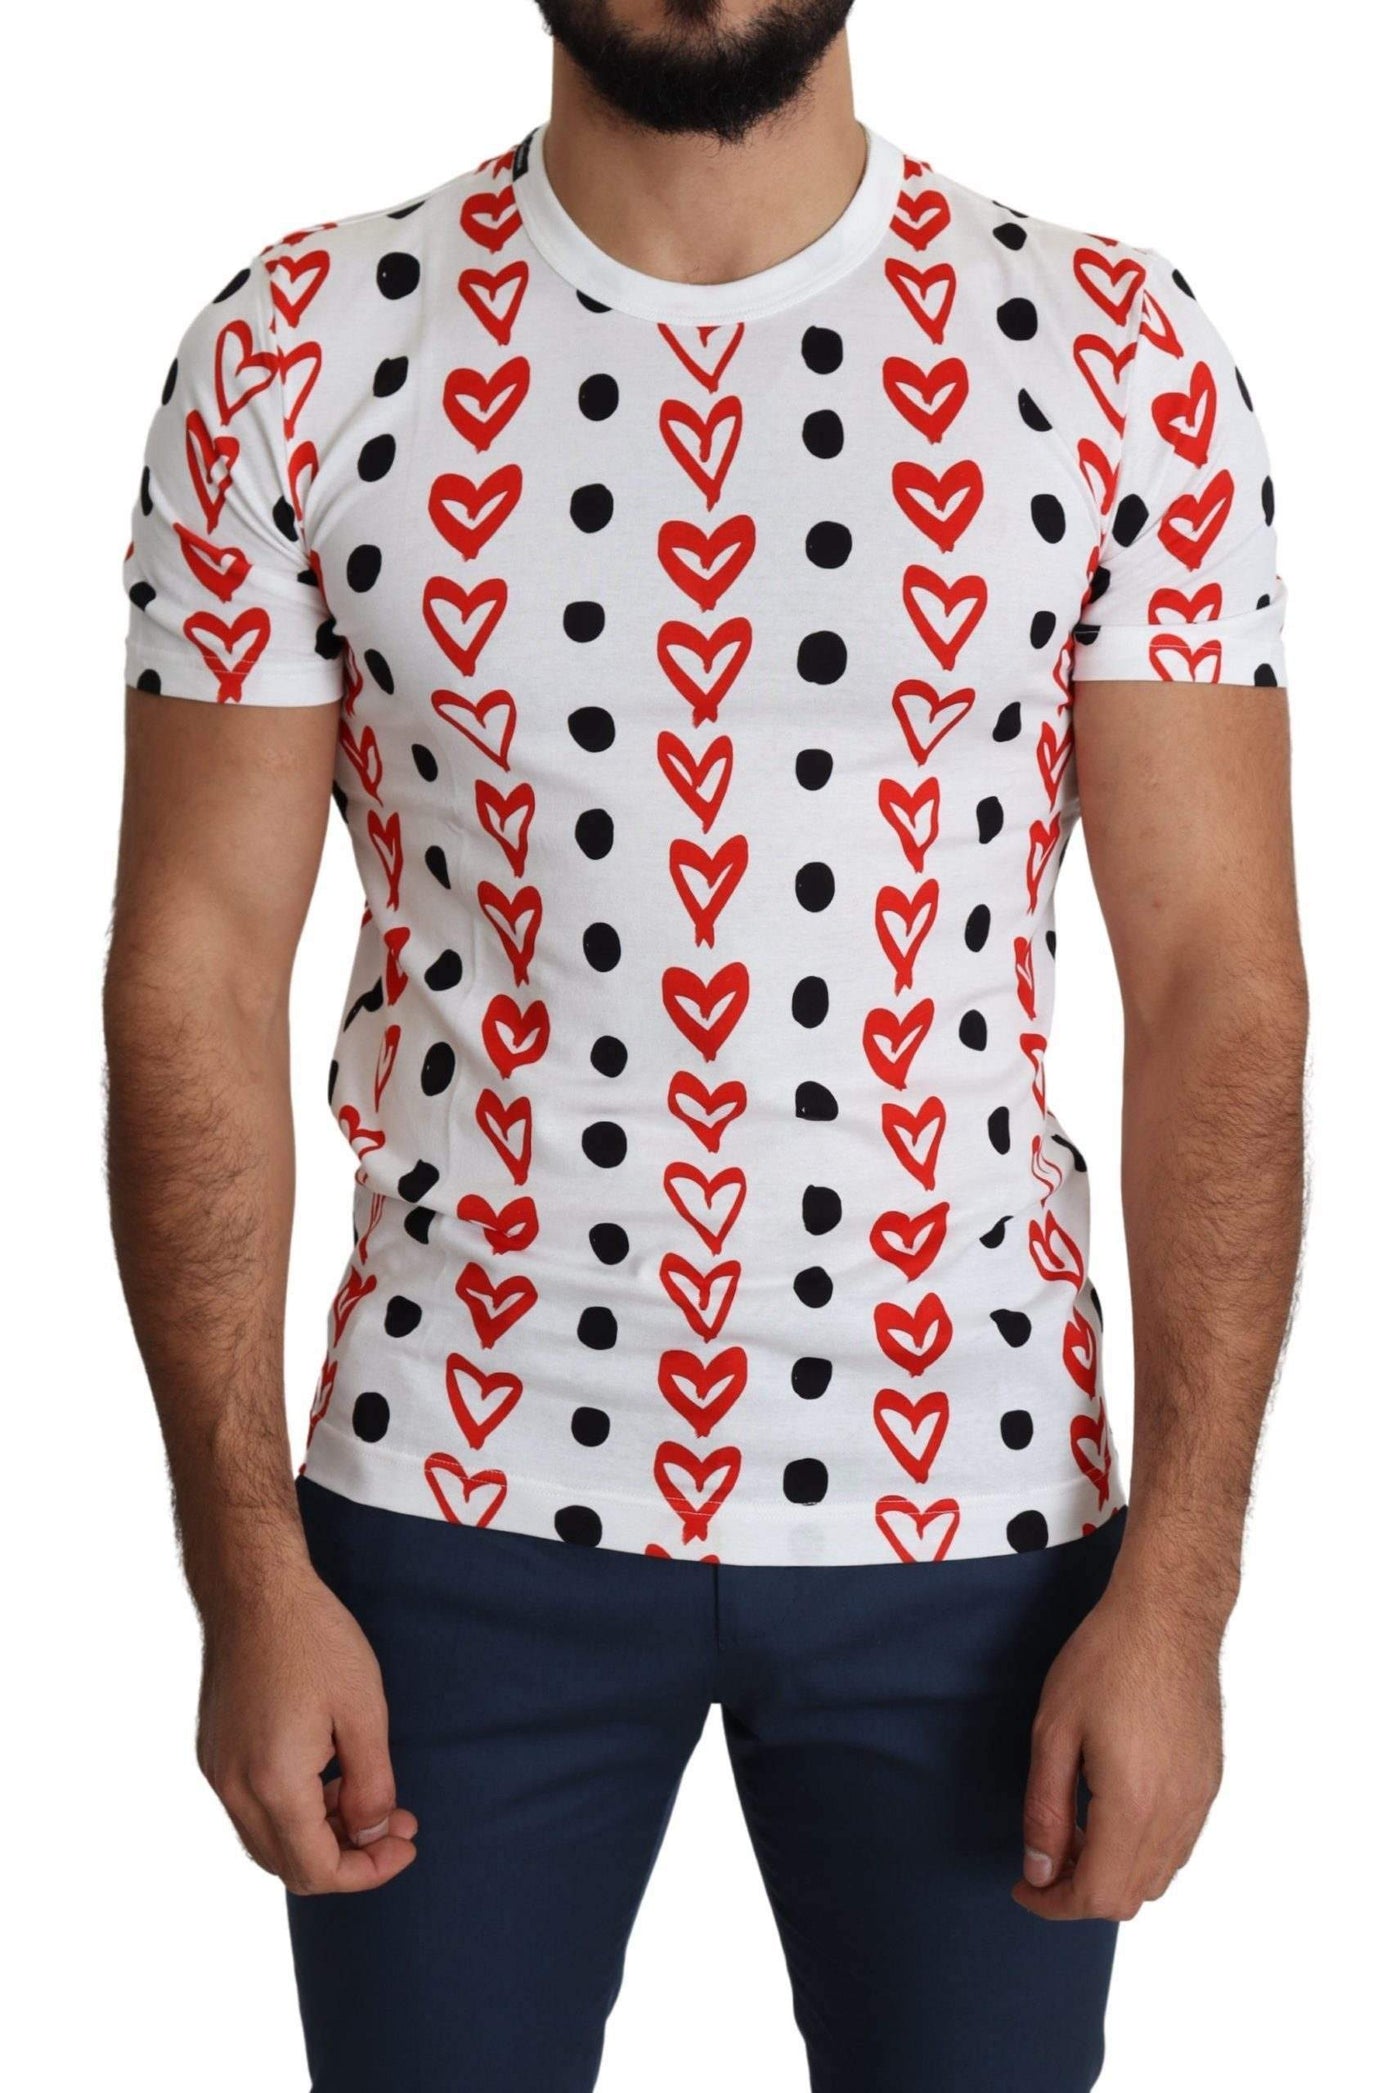 Dolce & Gabbana White Hearts Print  Cotton Men Top T-shirt #men, Brand_Dolce & Gabbana, Dolce & Gabbana, feed-agegroup-adult, feed-color-white, feed-gender-male, feed-size-IT44 | XS, feed-size-IT46 | S, feed-size-IT50 | L, feed-size-IT54 | XL, Gender_Men, IT44 | XS, IT46 | S, IT48 | M, IT50 | L, IT54 | XL, Men - New Arrivals, T-shirts - Men - Clothing, White at SEYMAYKA